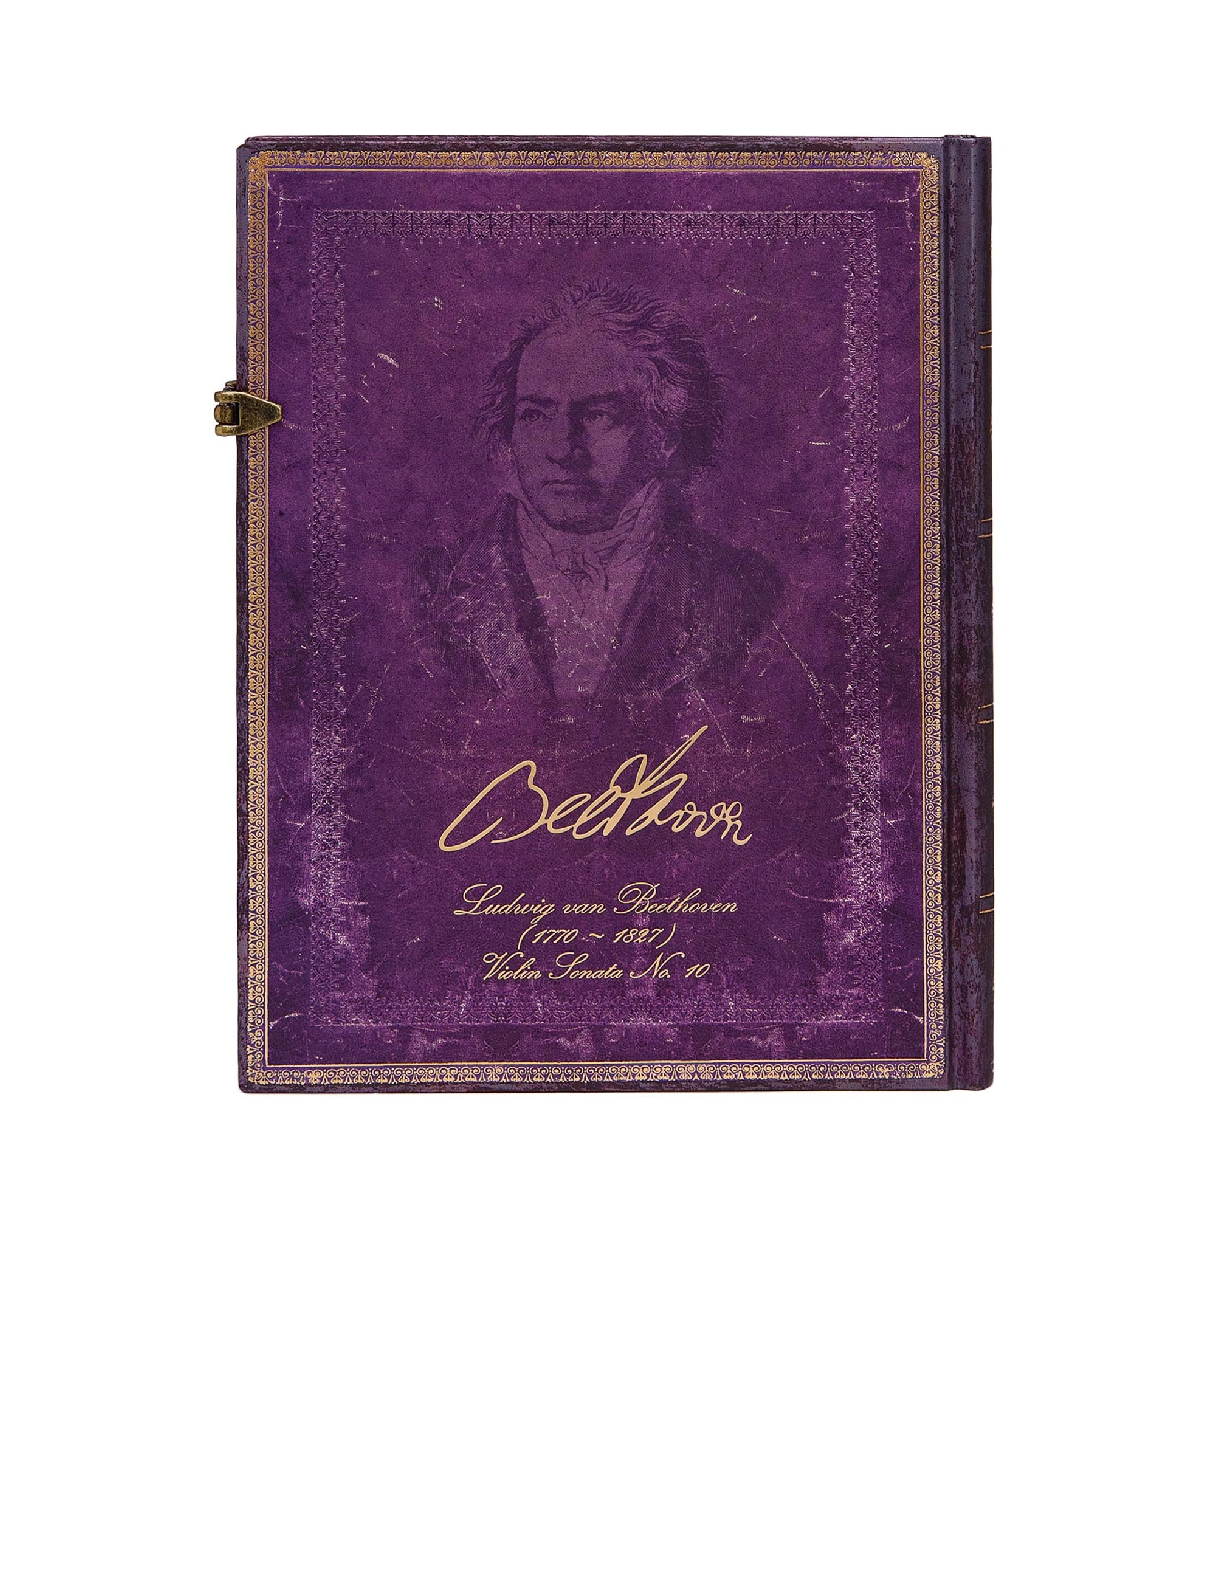 Beethoven's 250th Birthday, Special Edition, Hardcover, Ultra, Lined, Clasp Closure, 144 Pg, 120 GSM